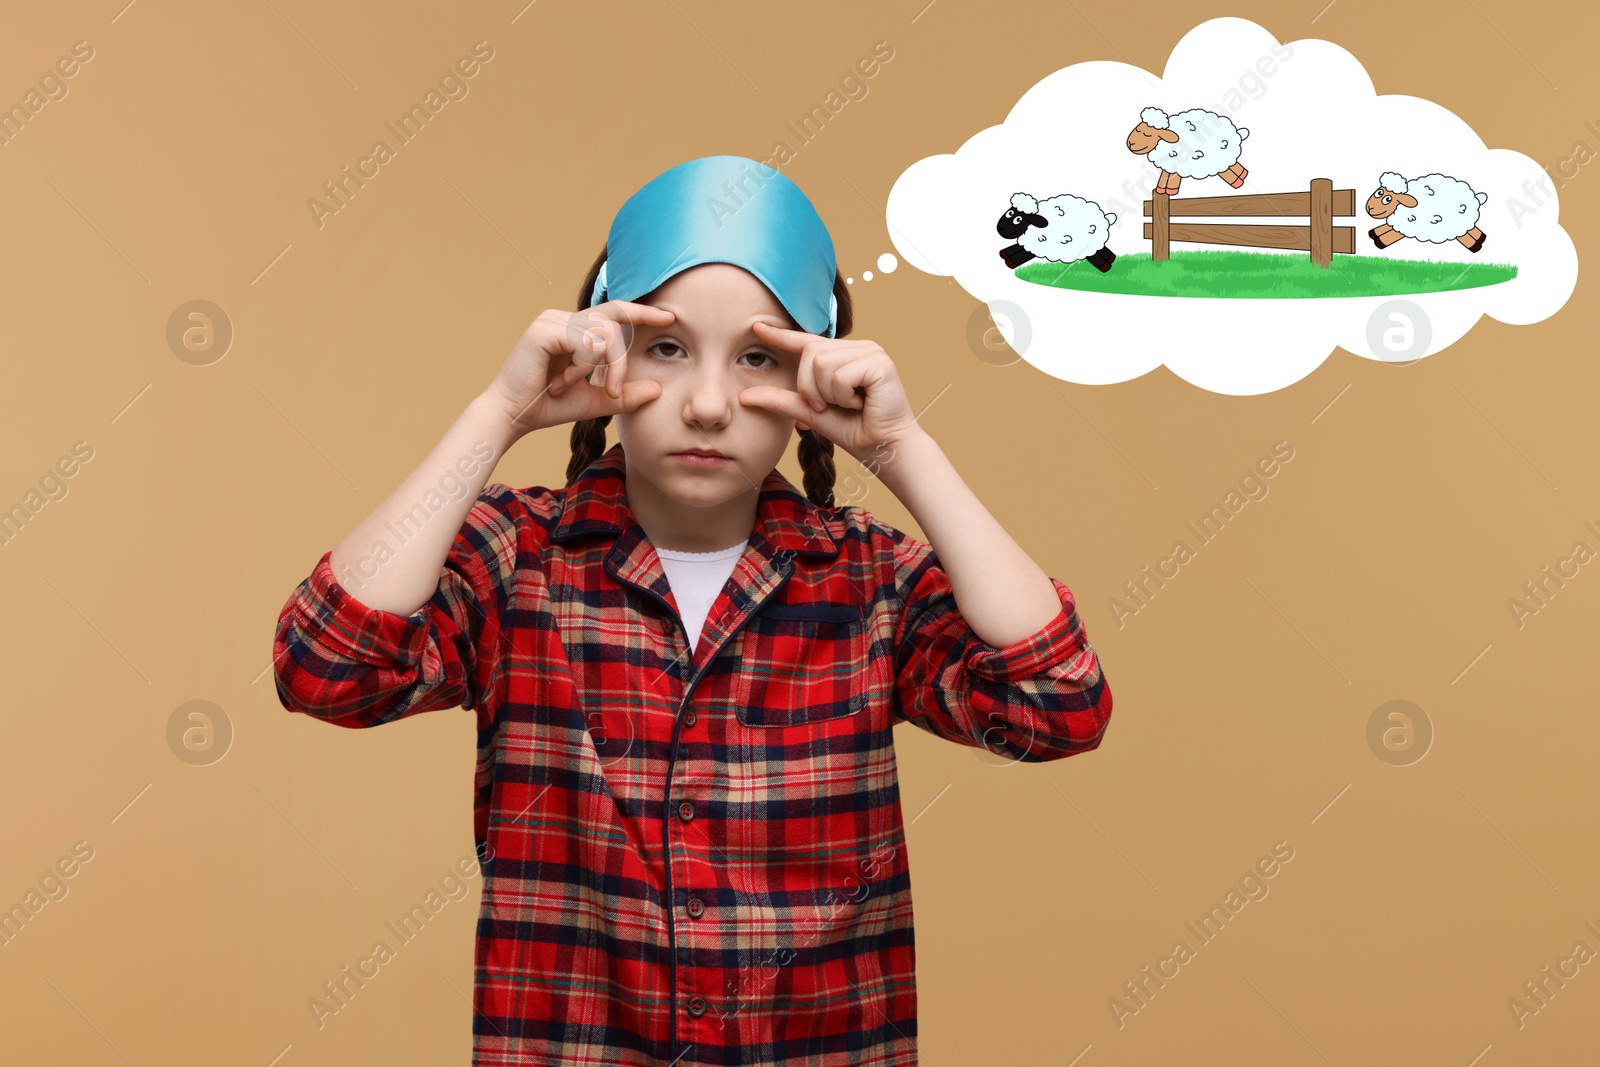 Image of Tired girl suffering from insomnia on light brown background. Thought cloud with illustrations of sheep jumping over fence